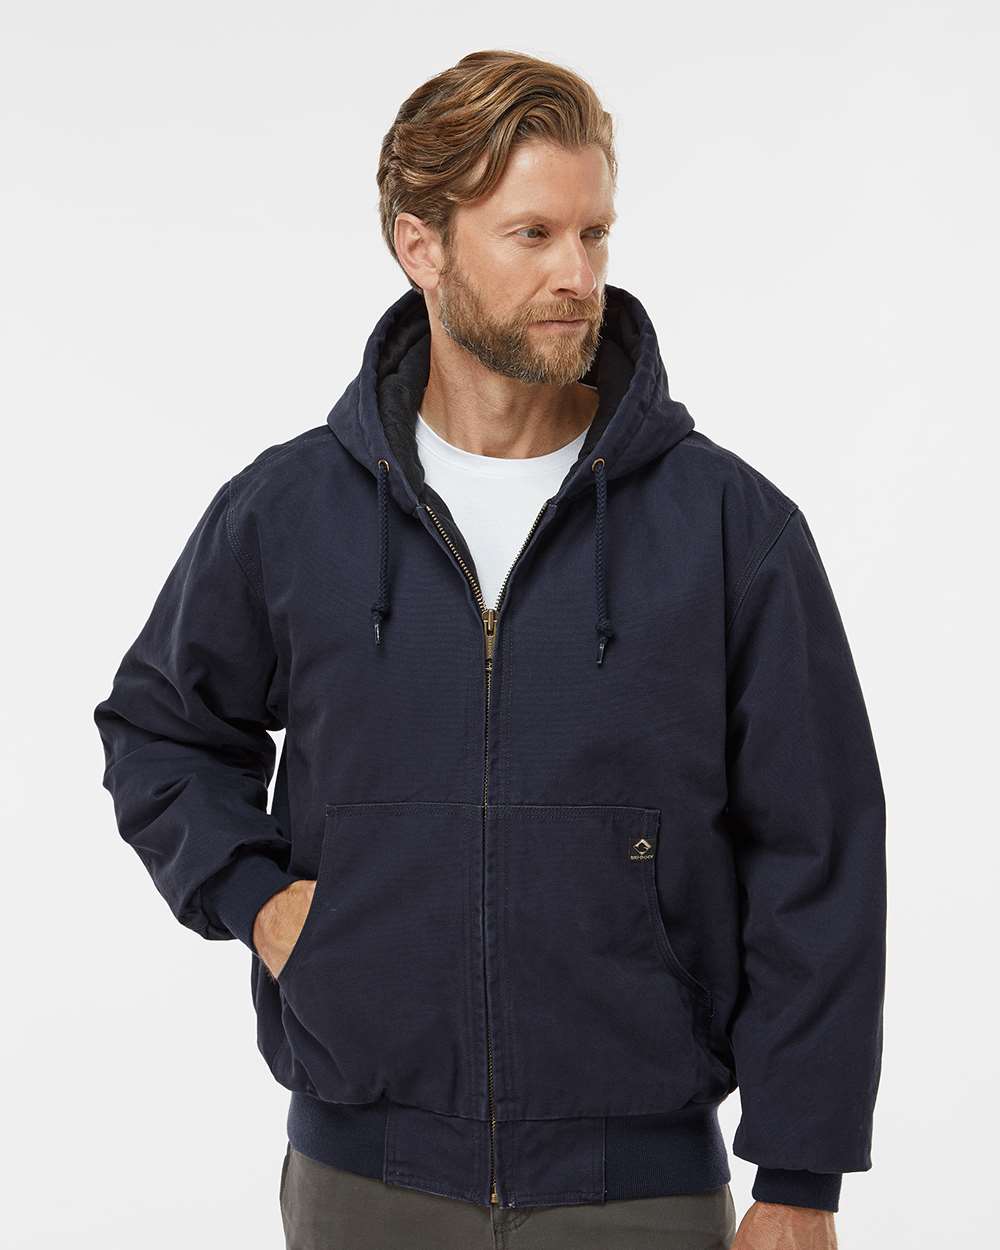 DRI DUCK Cheyenne Boulder Cloth™ Hooded Jacket with Tricot Quilt Lining 5020 #colormdl_Navy